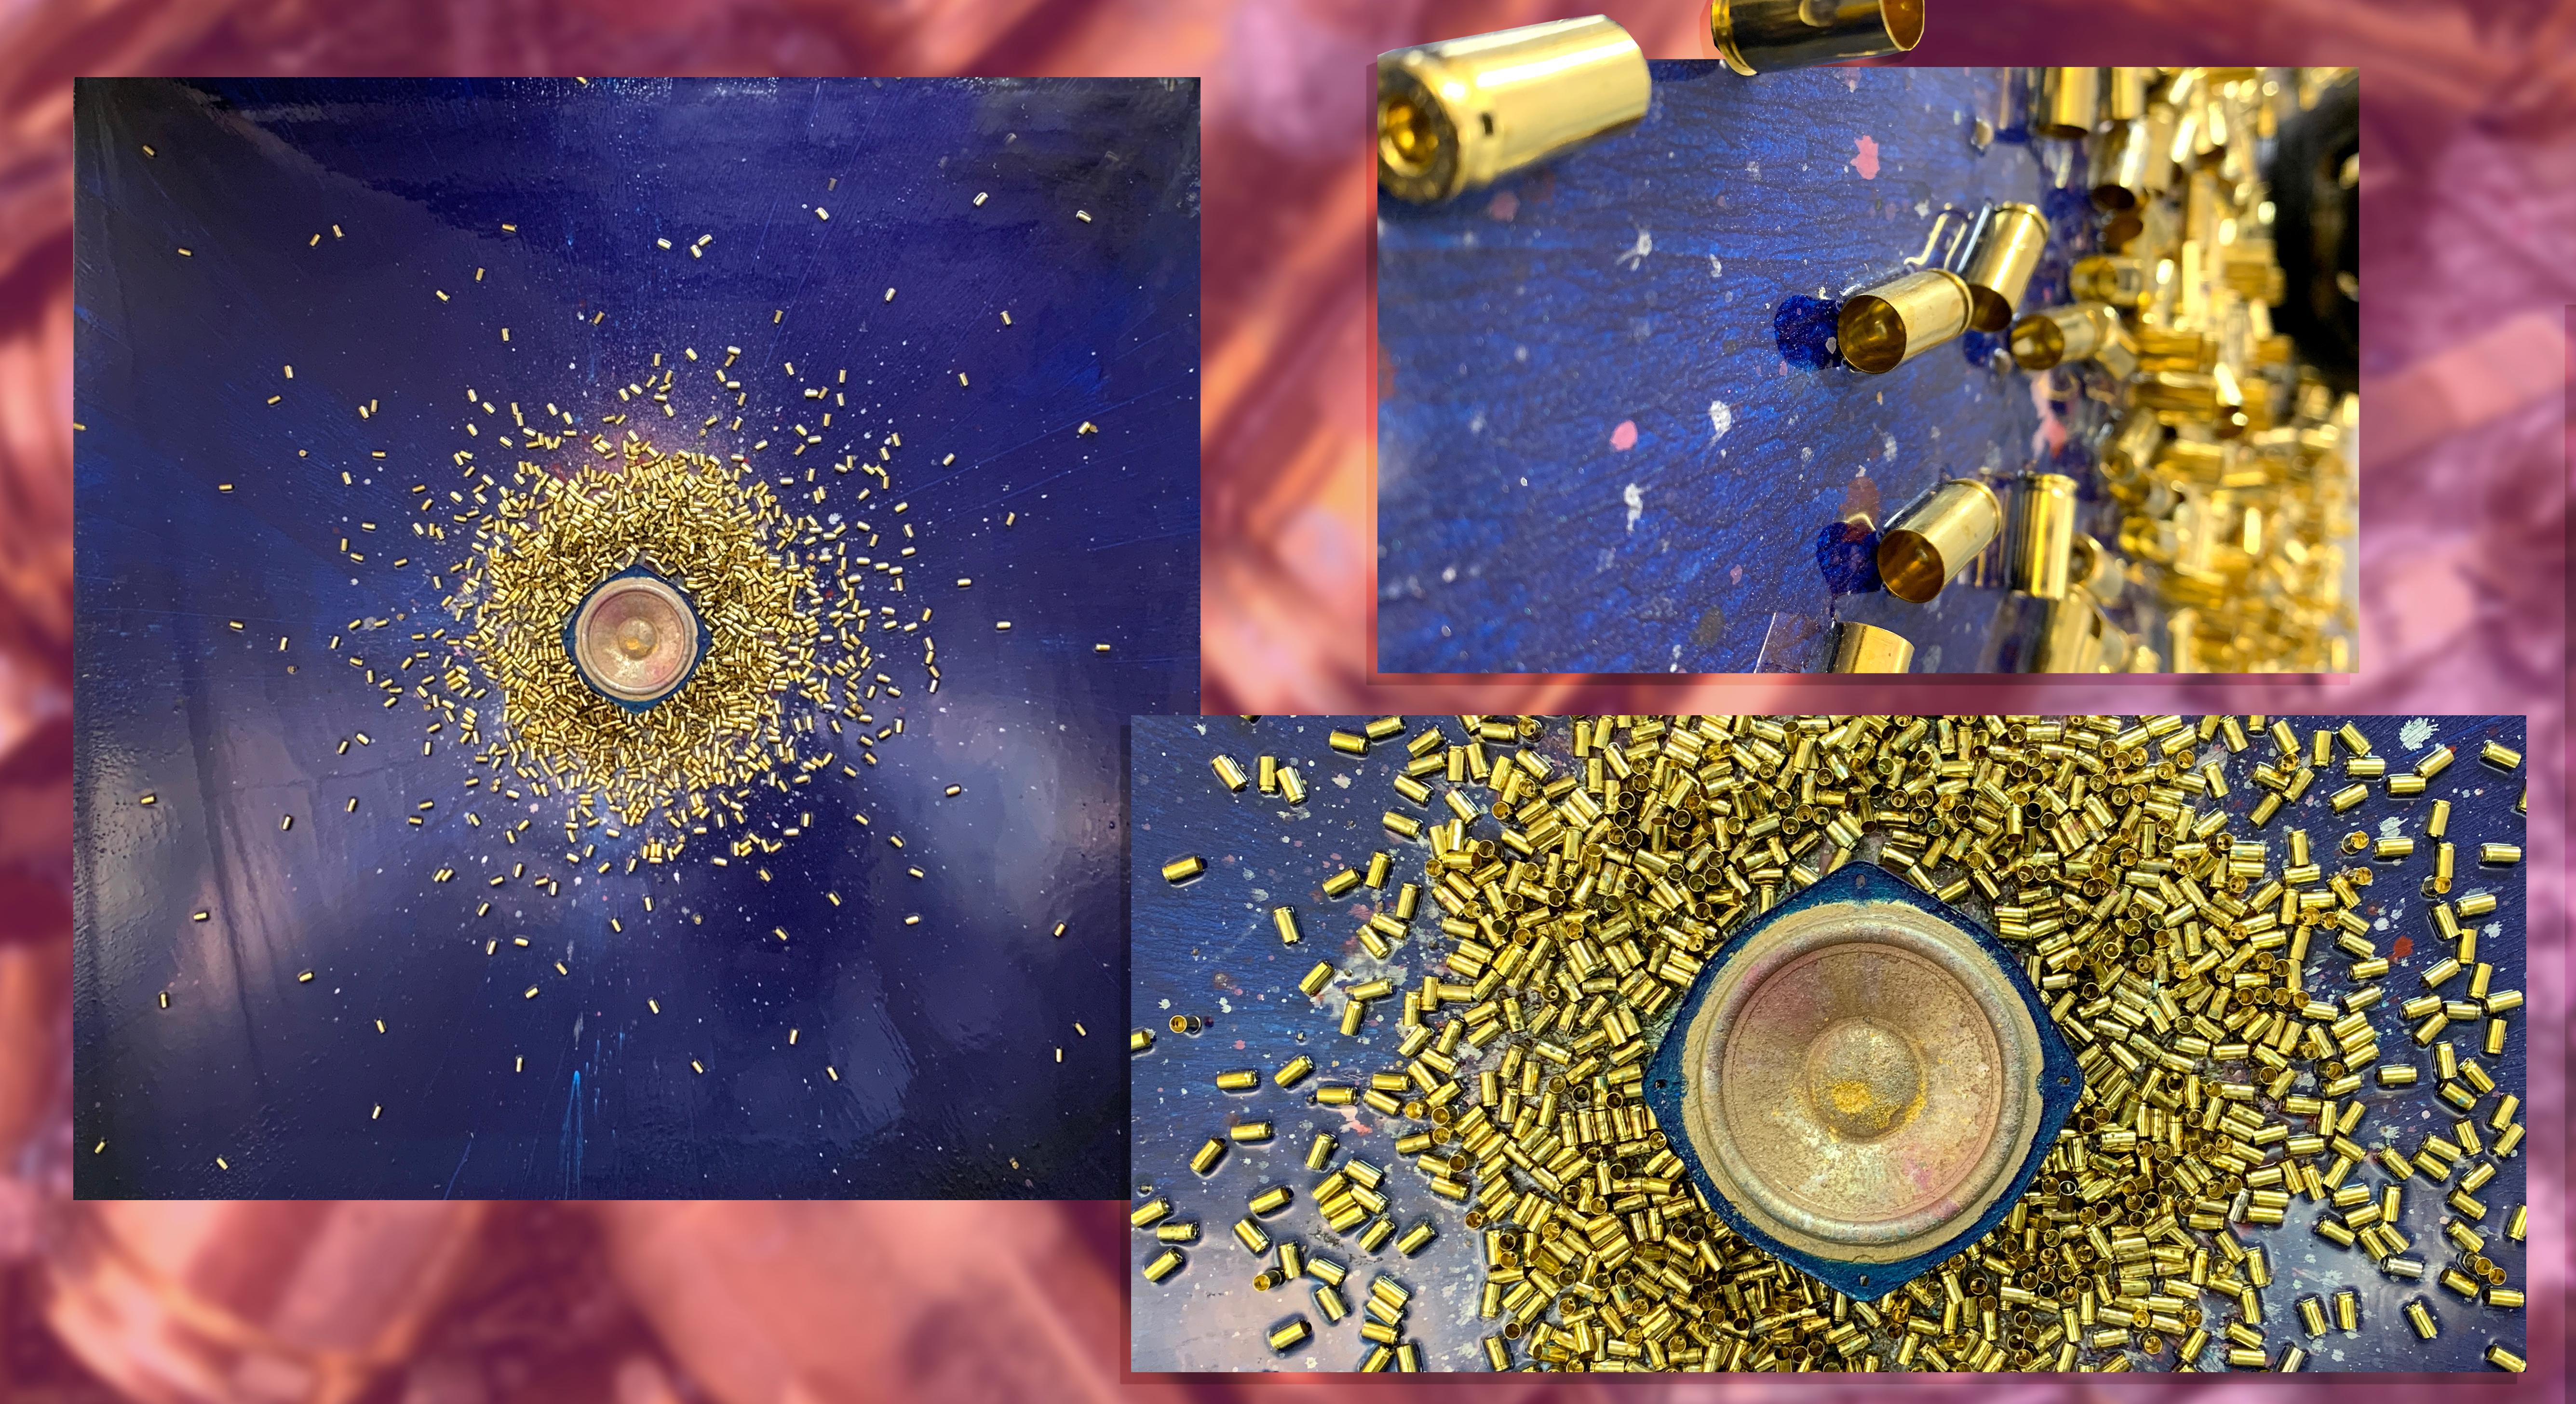 Speaker Mounted on Canvas
9mm Bullet
24 k Gold
5 Carat Diamond Dust
Shredded USD's
Hemp Seeds
Acrylic Paint 
Artist Powder
Enamel
Epoxy

This painting was created by Painting with Sound using Childish Gambino's This is America hit song on loop to